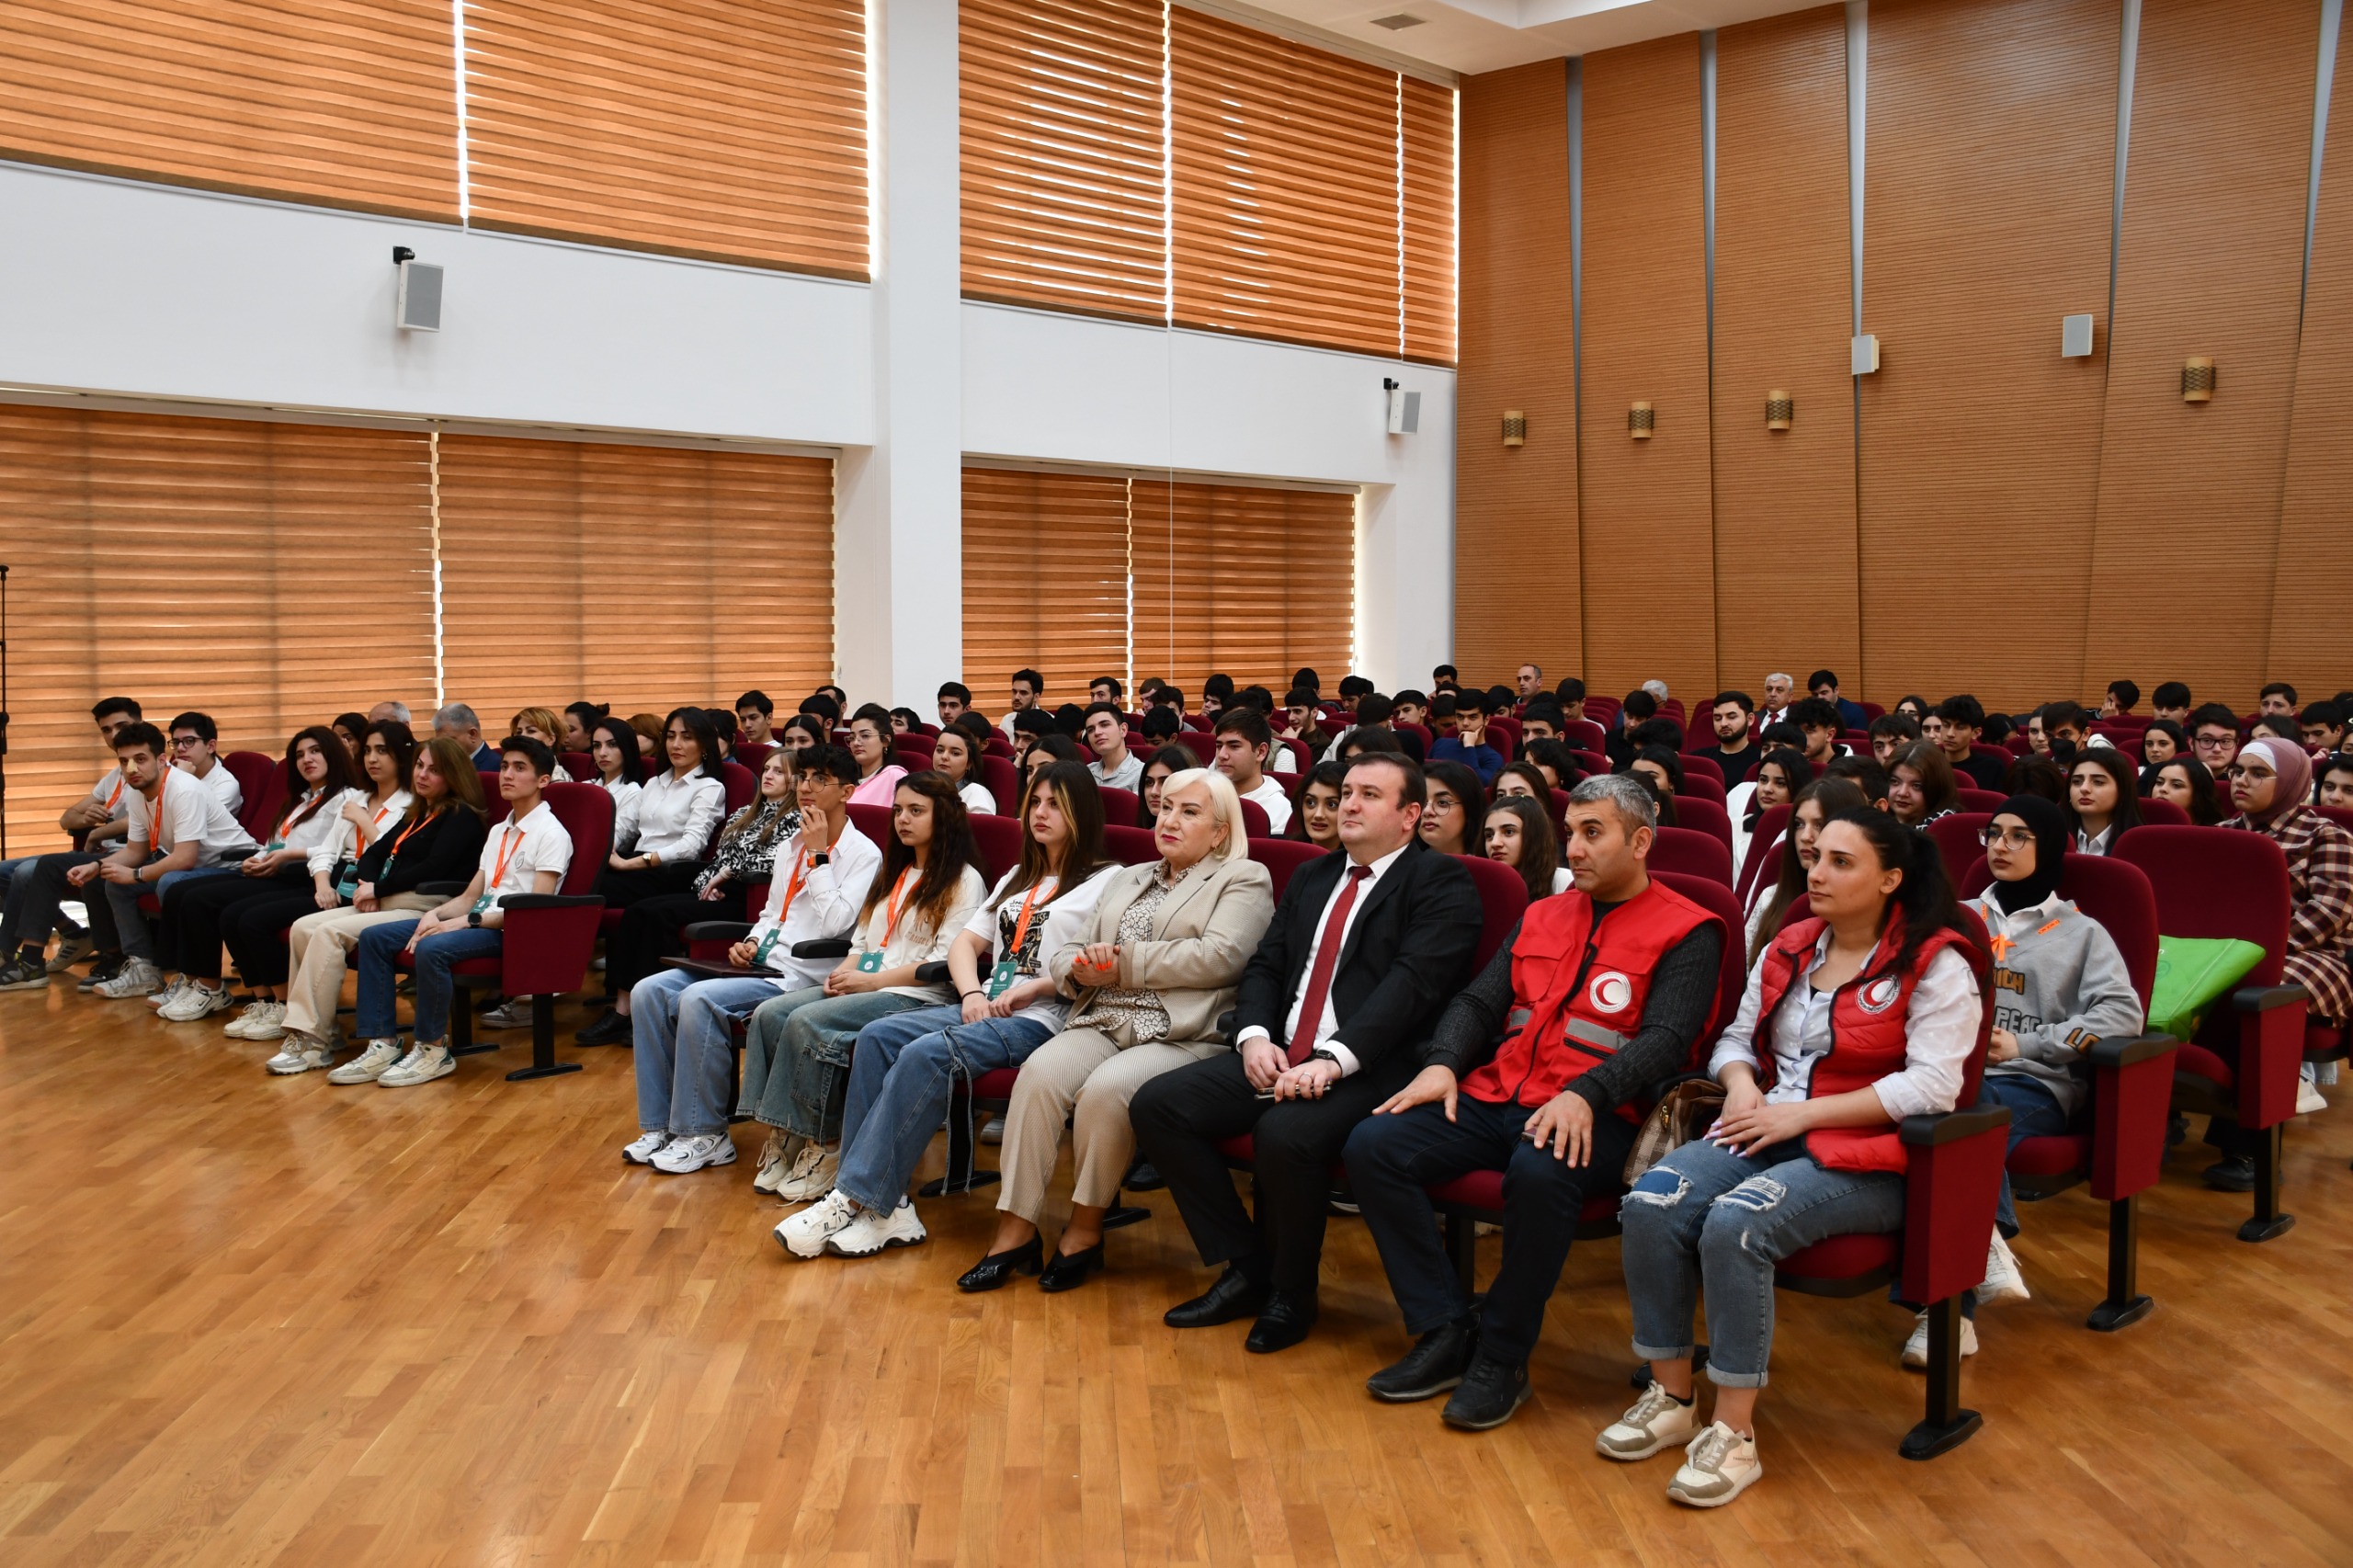  The Azerbaijan Red Crescent Society holds a "Health promotion" event at the Vocational Education Centre